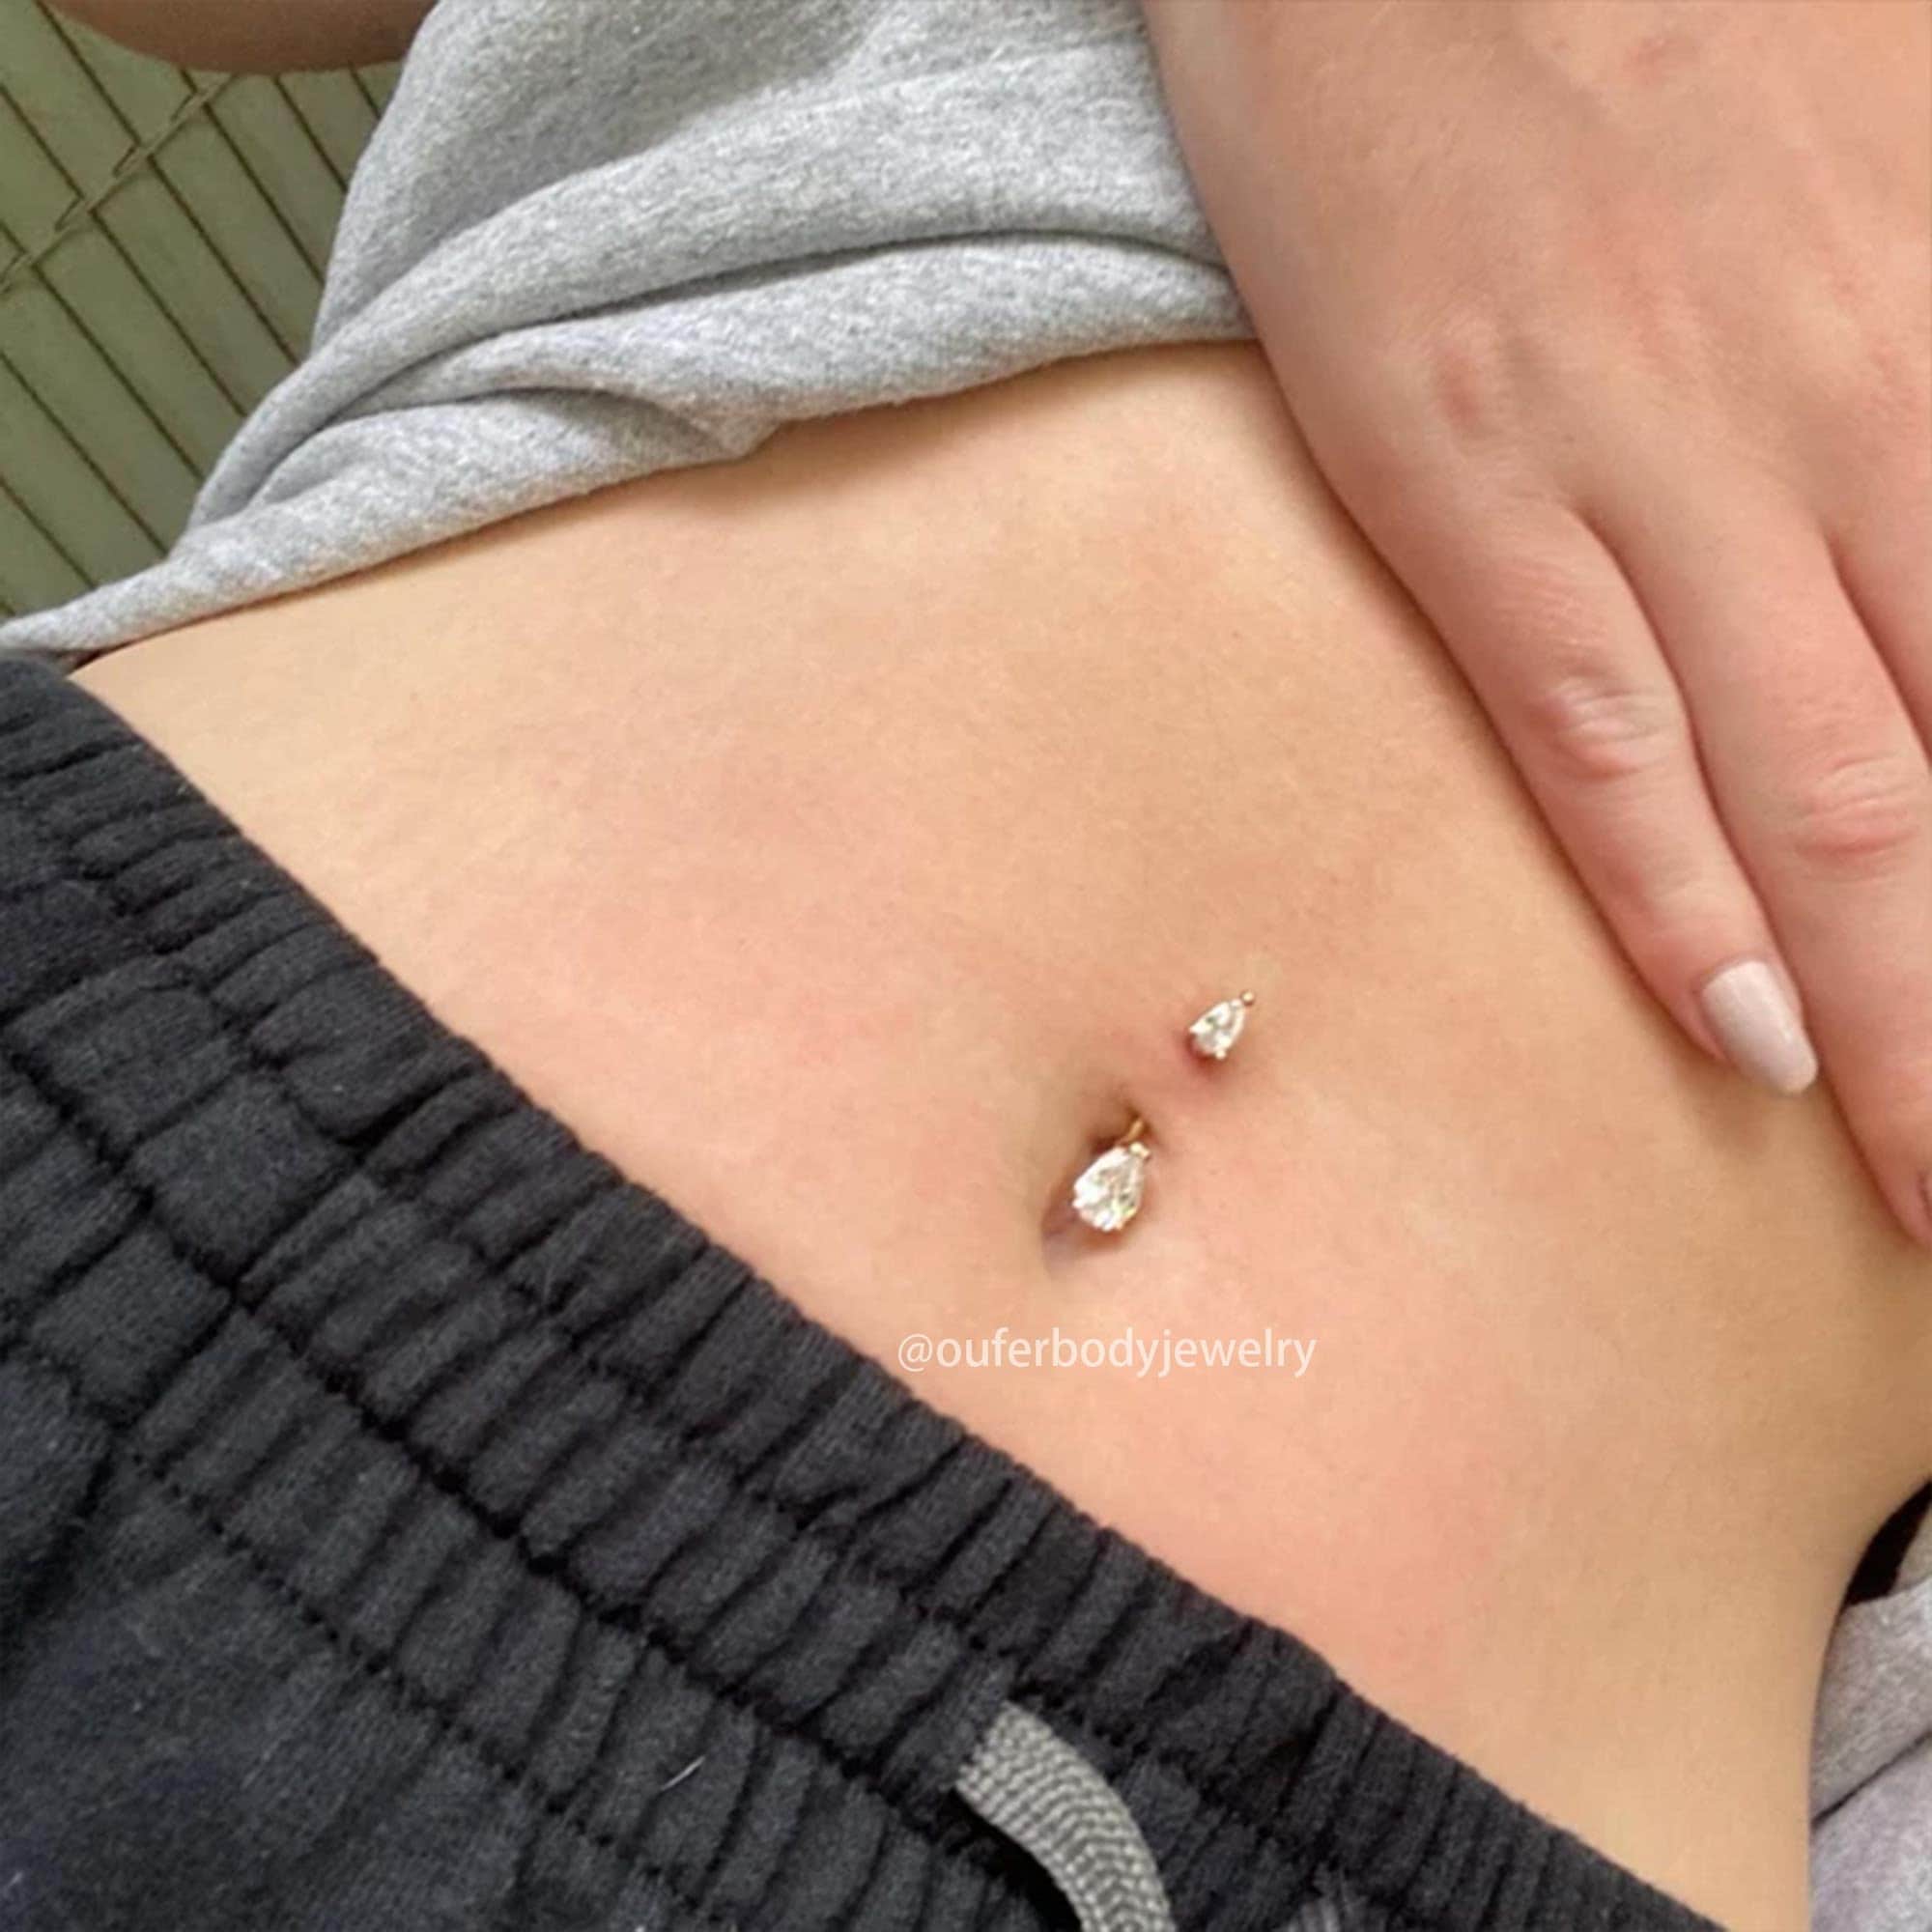 amos hsiao add photo belly piercing on fat stomach